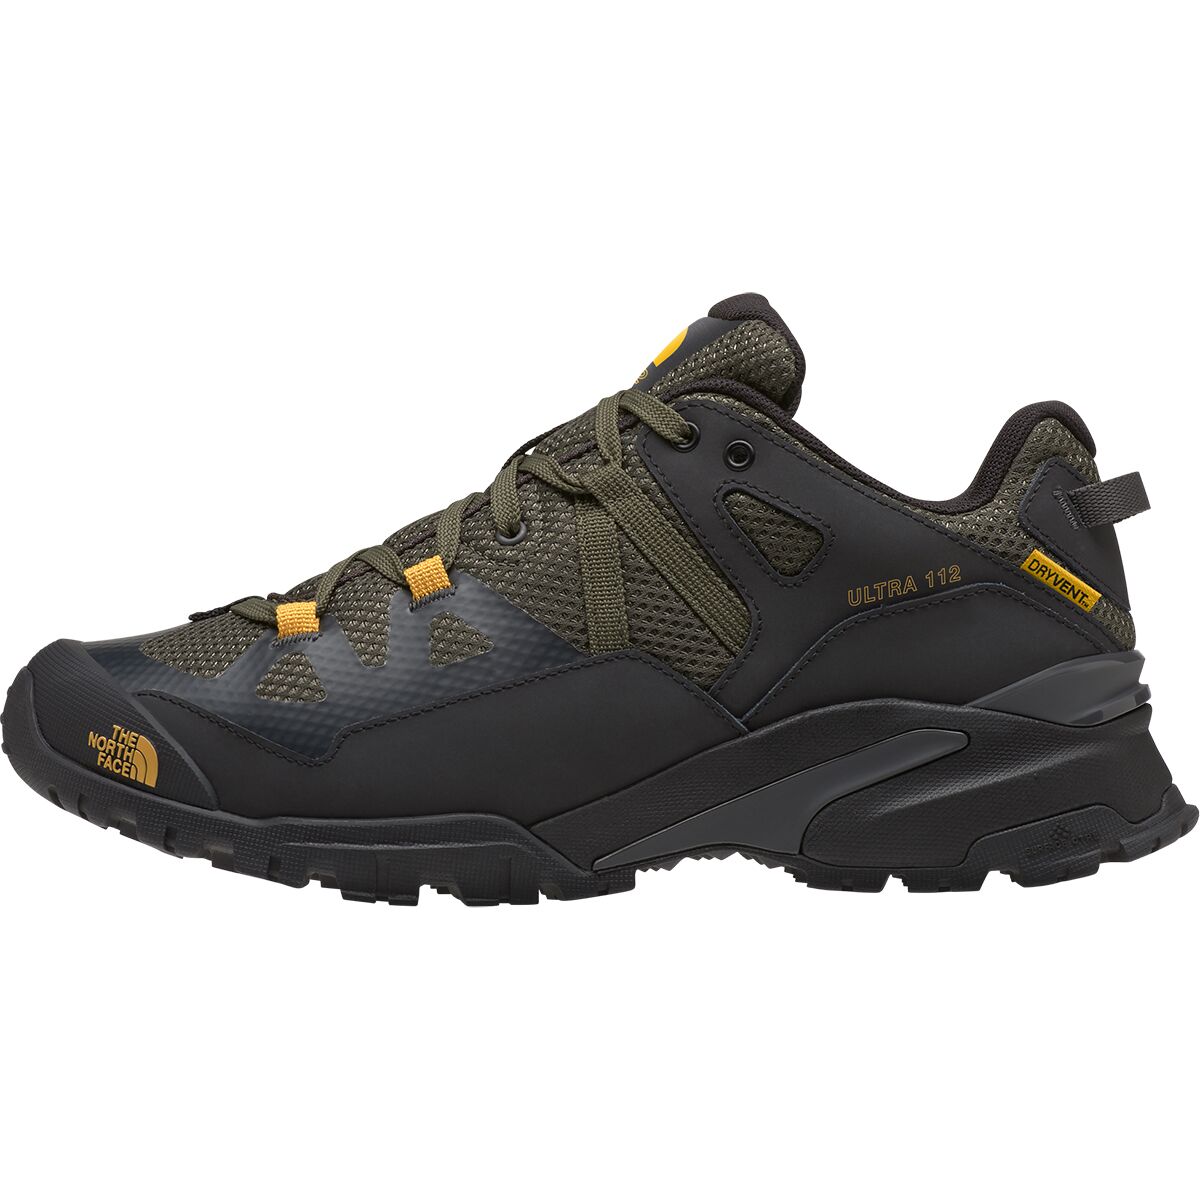 The North Face Ultra 112 WP Shoe - Men's